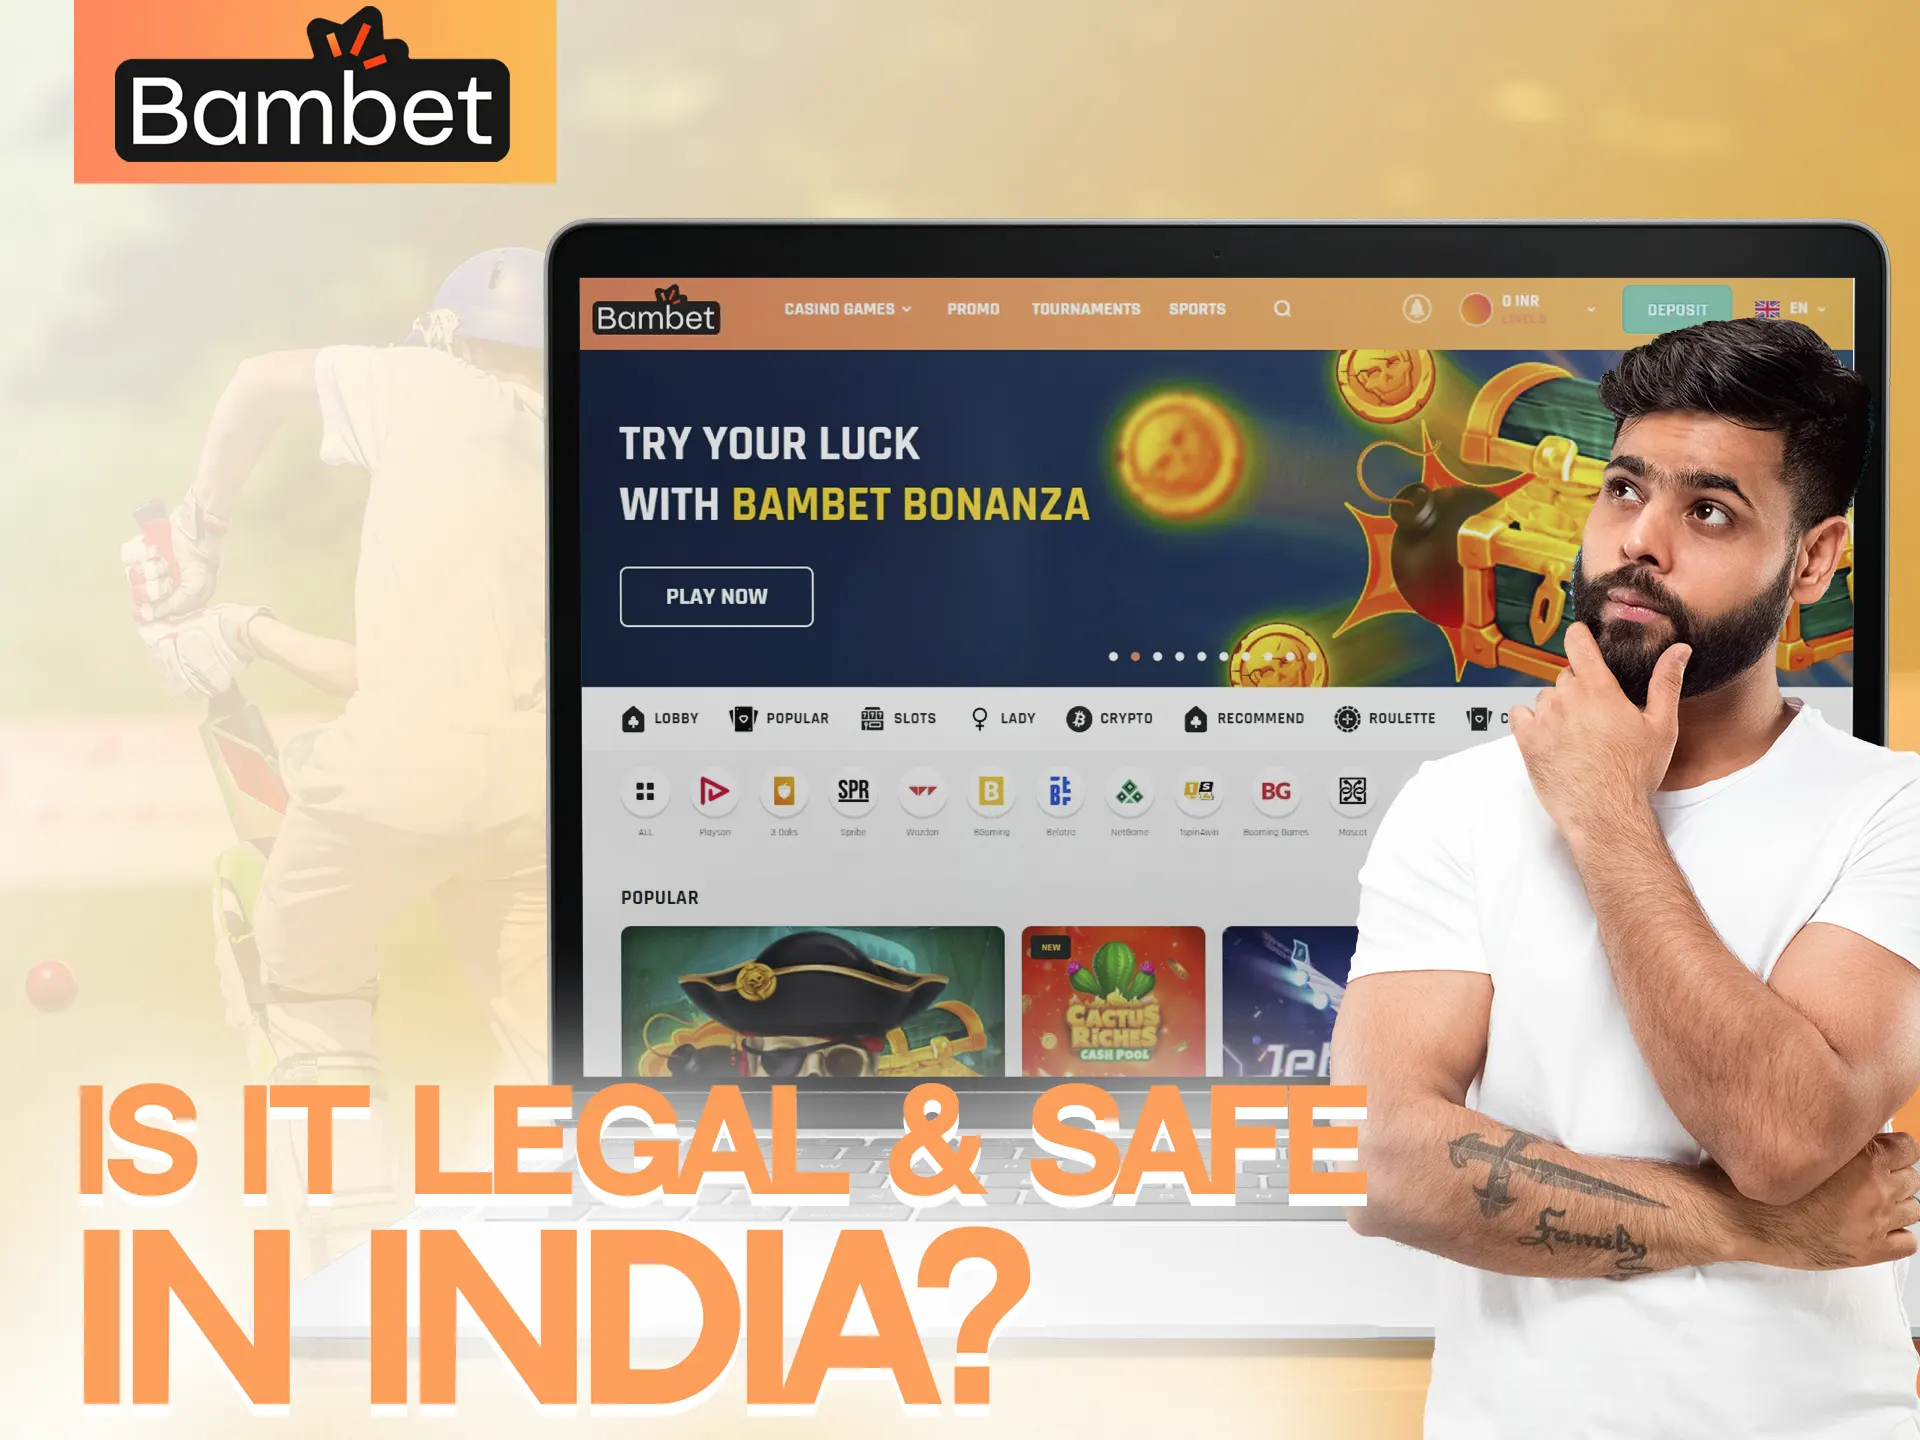 Bambet is legal and safe for players, play without fear.